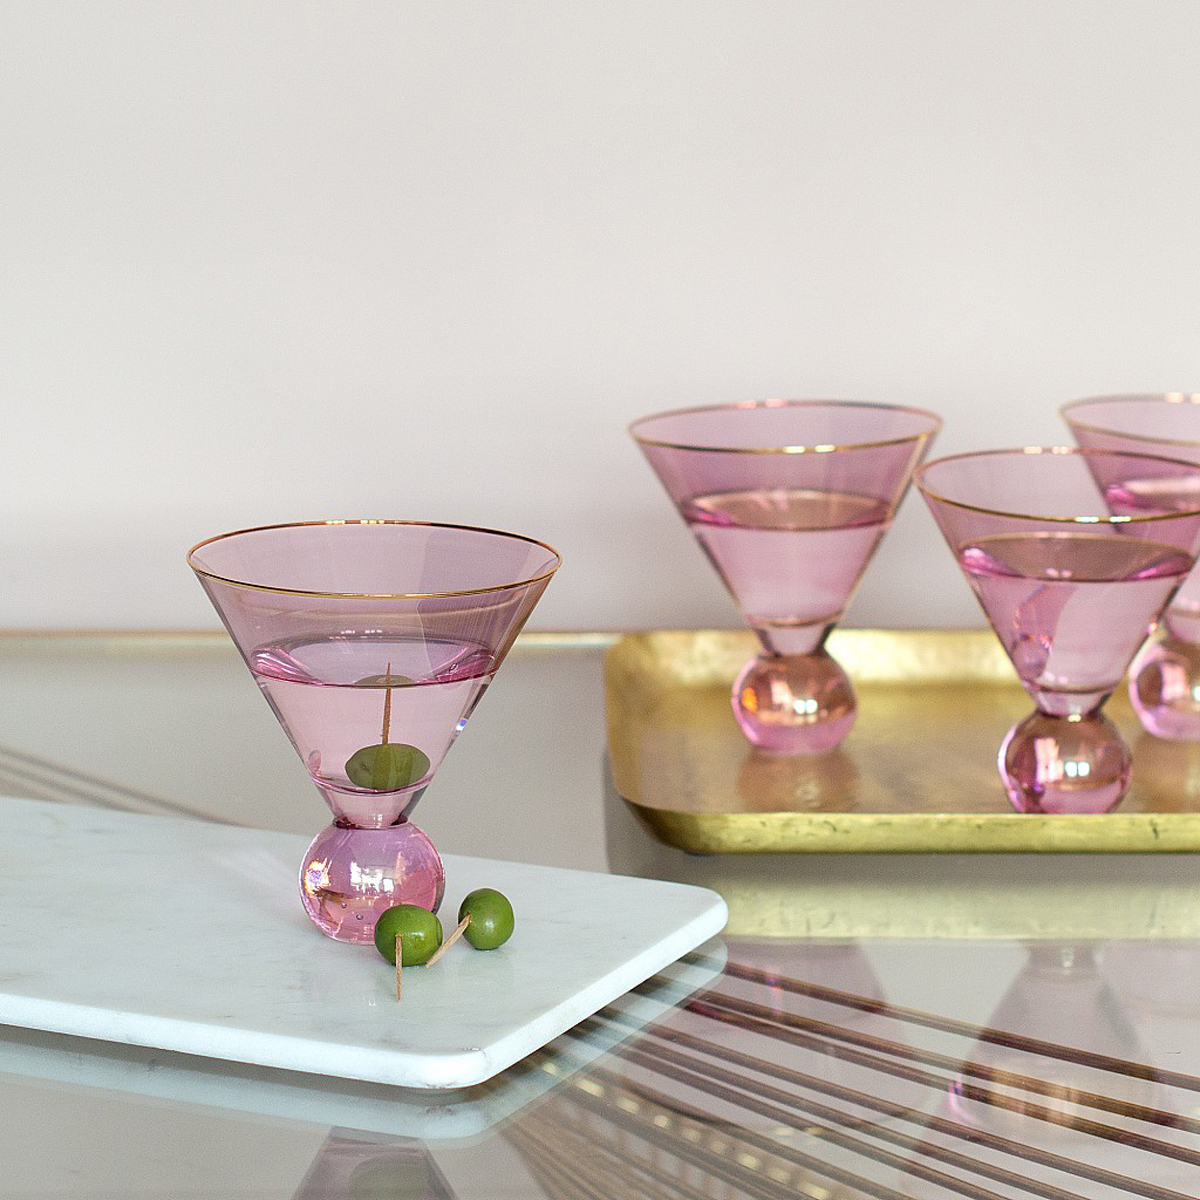 Pink Martini Glasses (set of 4) by Audenza, £38.95